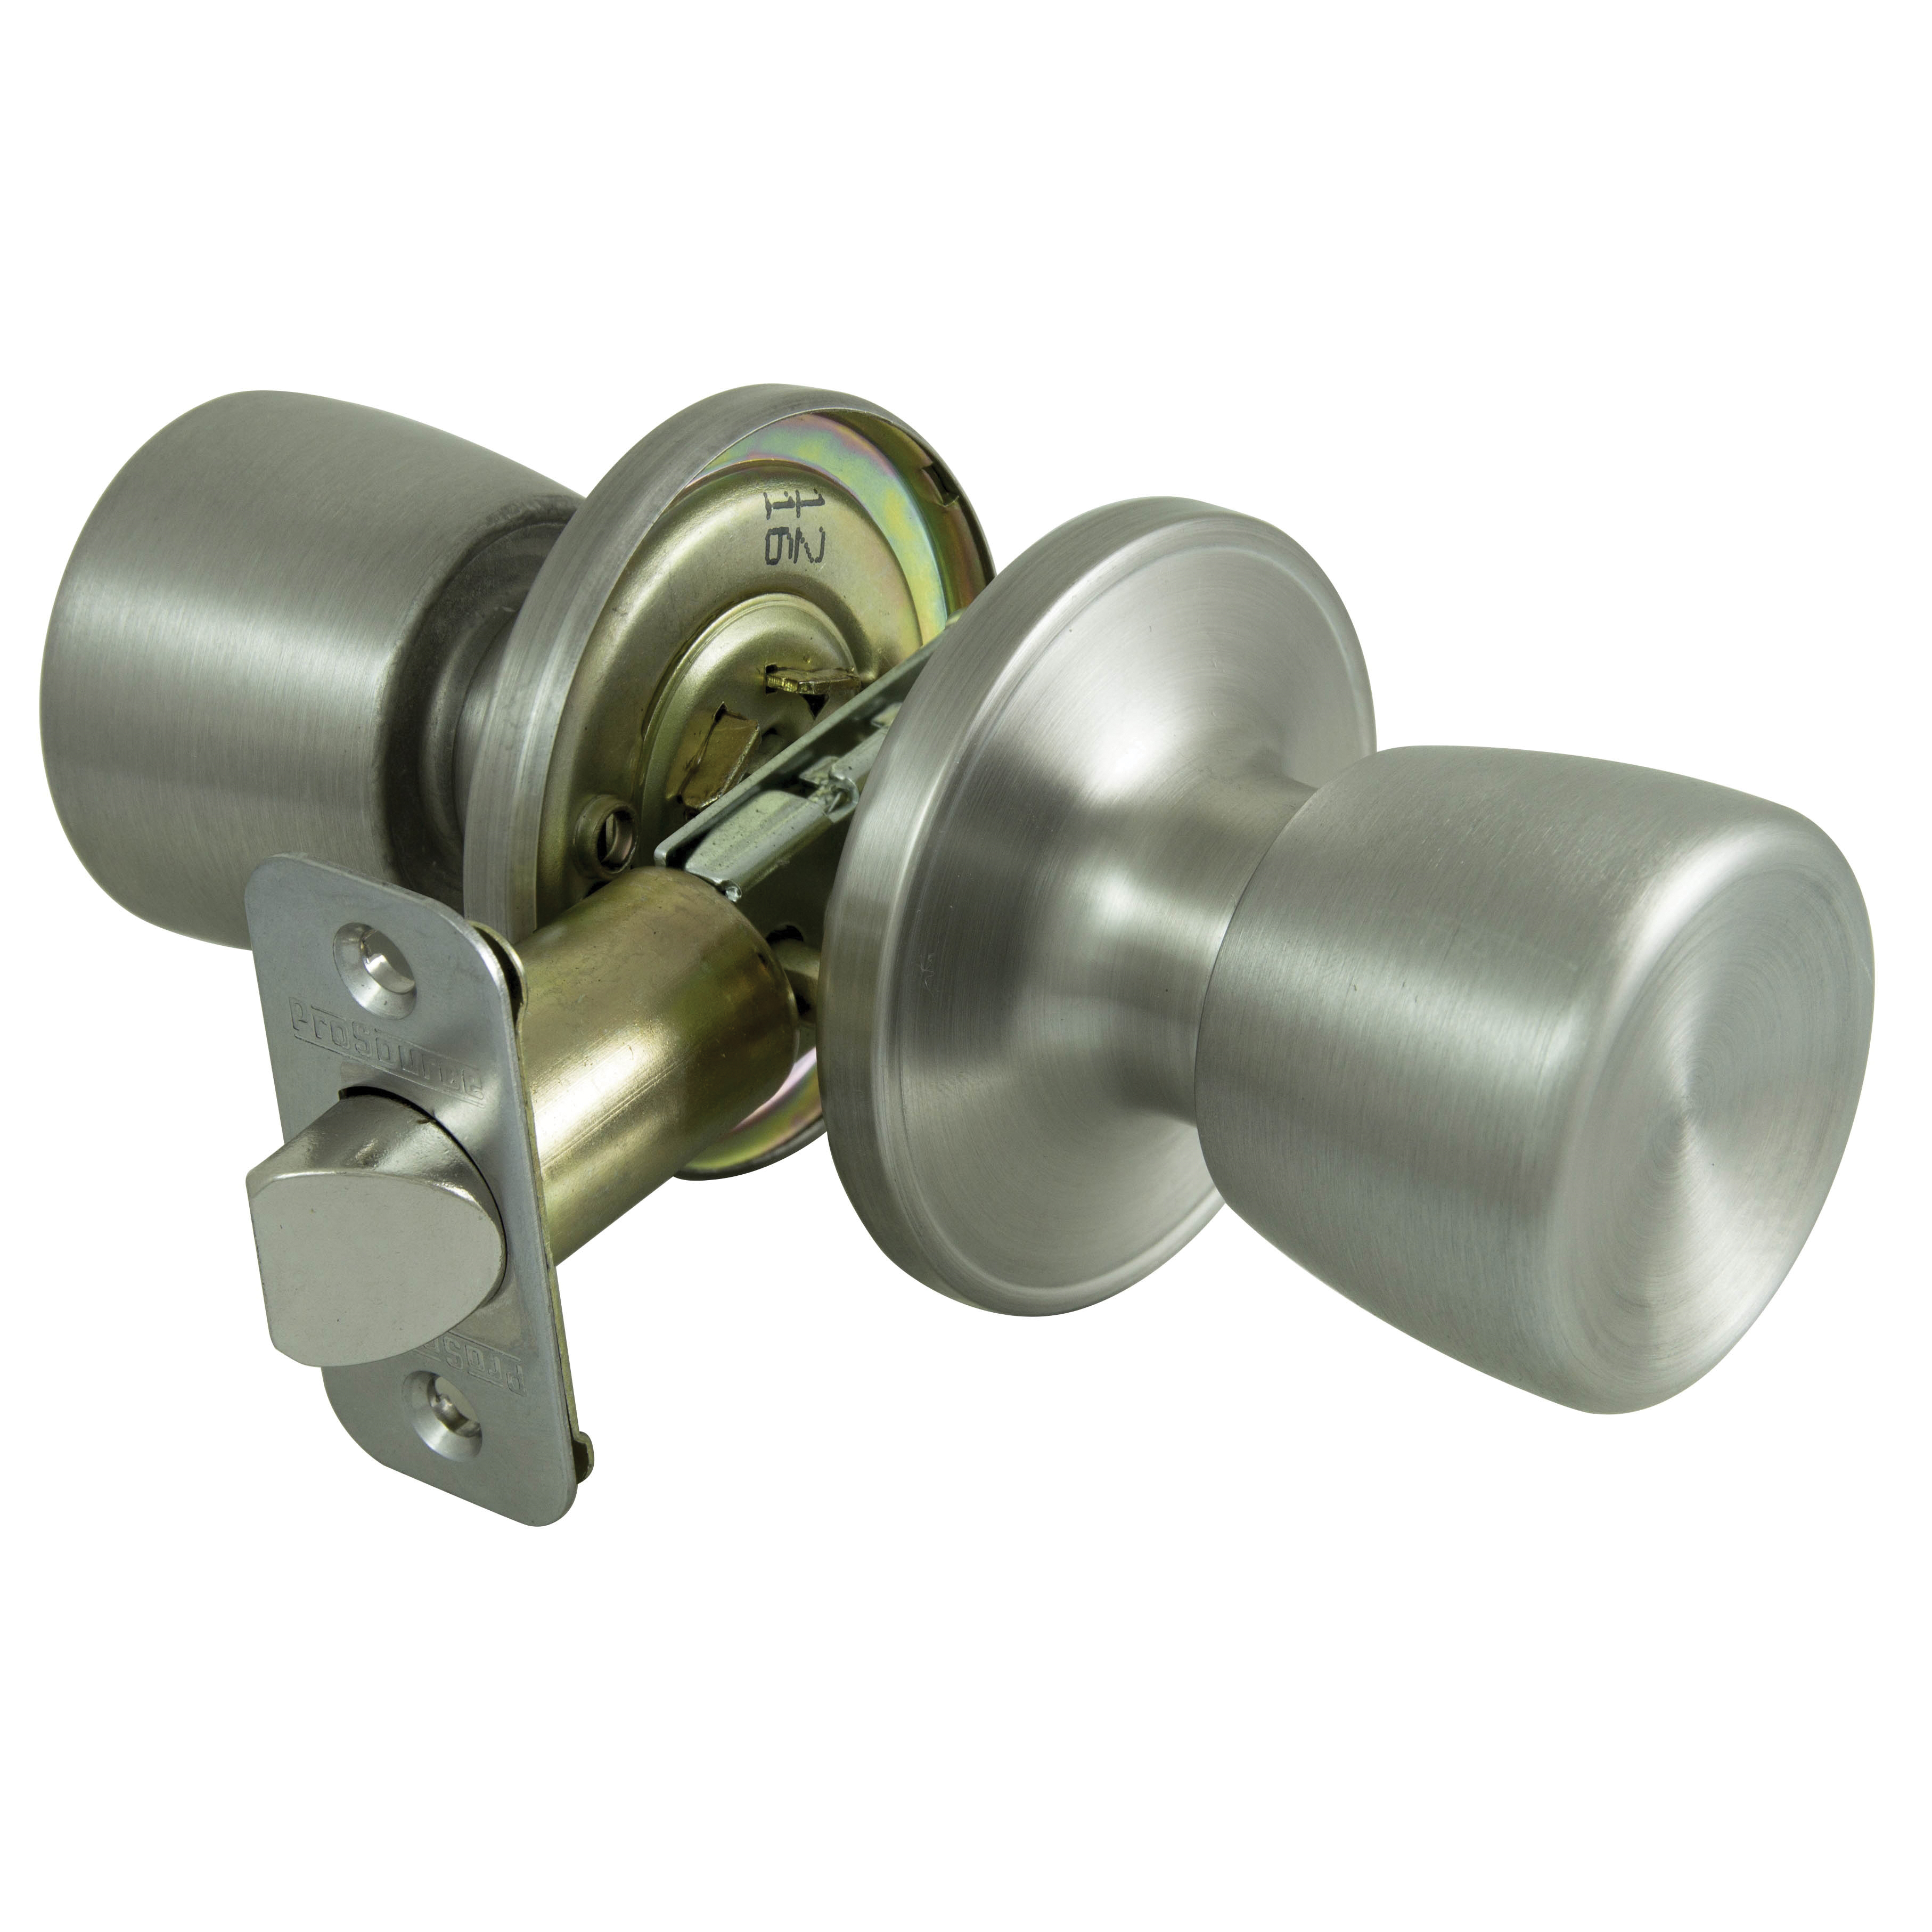 TS630BRA4V Passage Knob, Metal, Stainless Steel, 2-3/8 to 2-3/4 in Backset, 1-3/8 to 1-3/4 in Thick Door